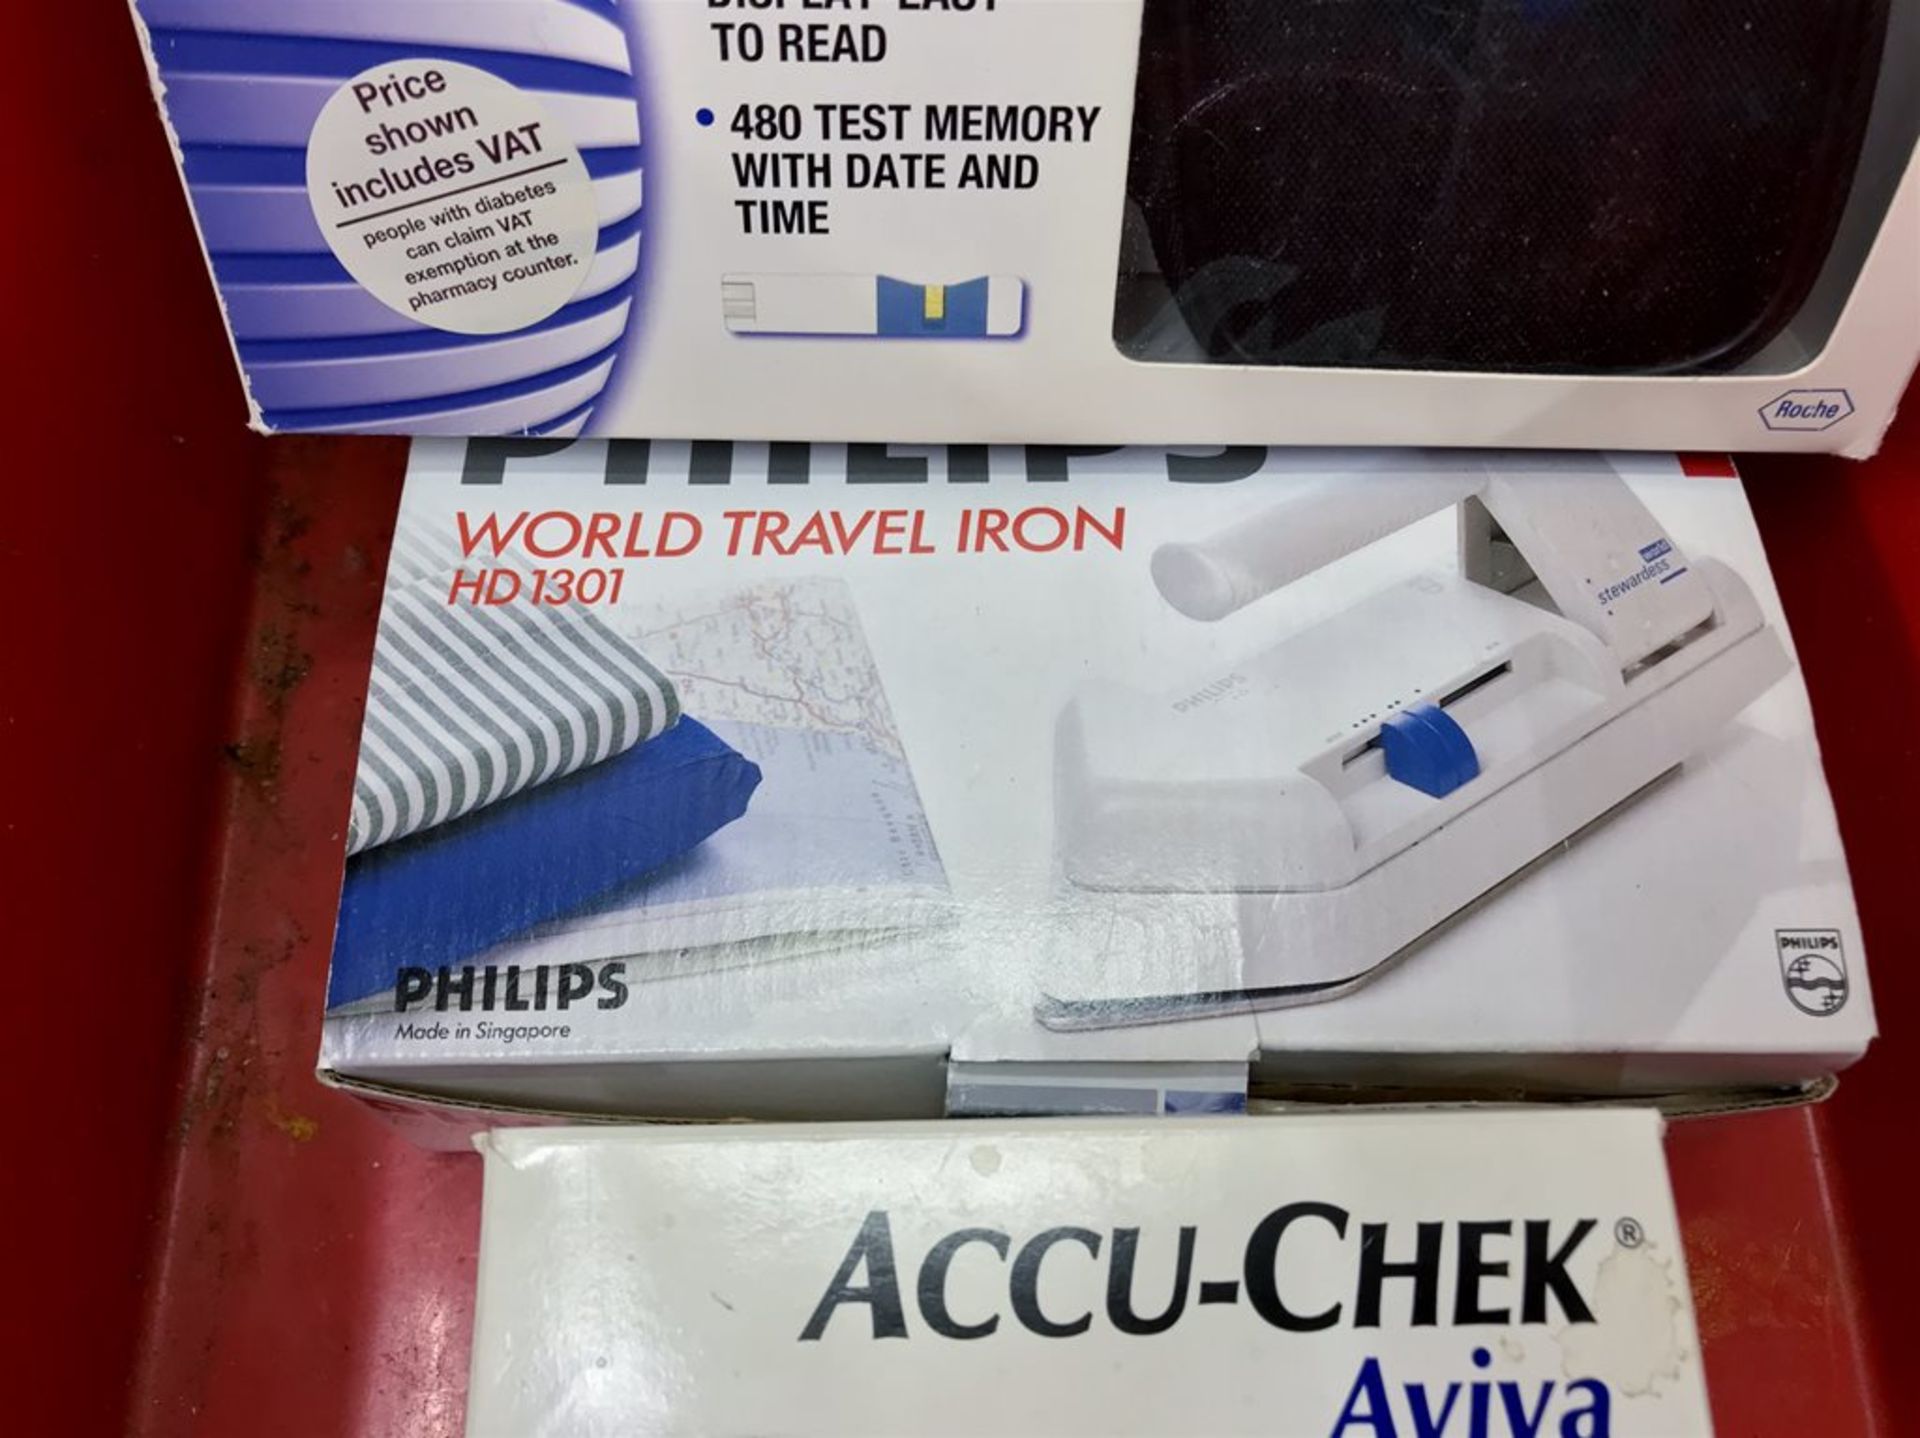 A Quantity of NEW Blood Glucose Testers and a Brand New Travel Iron - Image 3 of 4